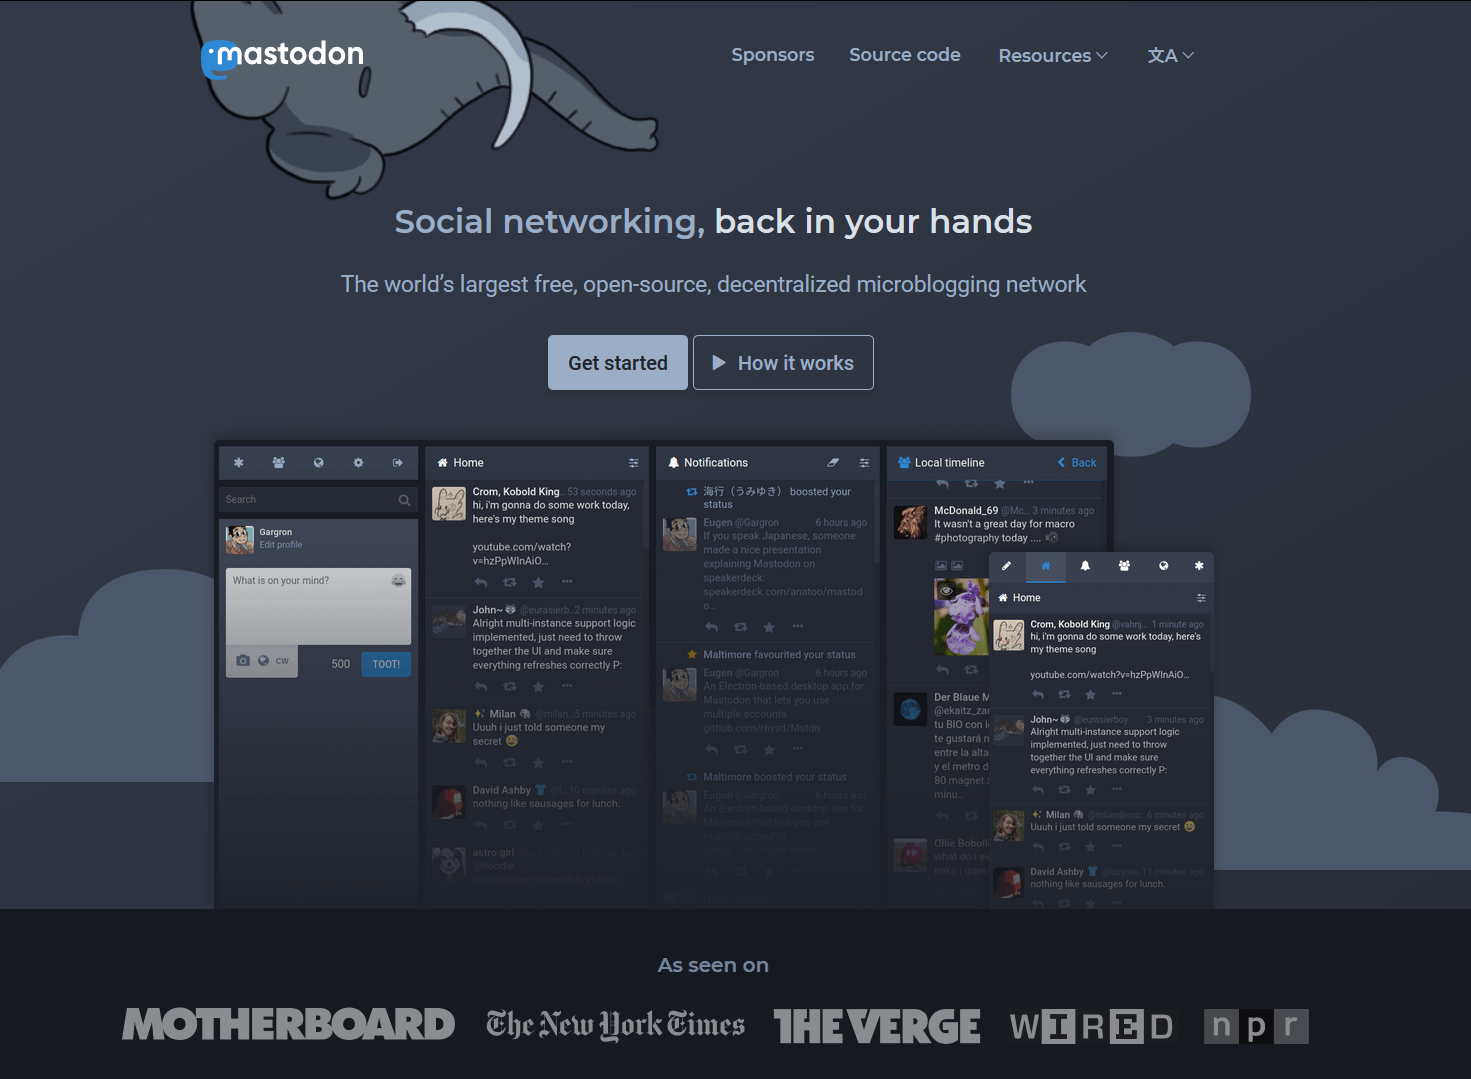 The landing page for Mastadon